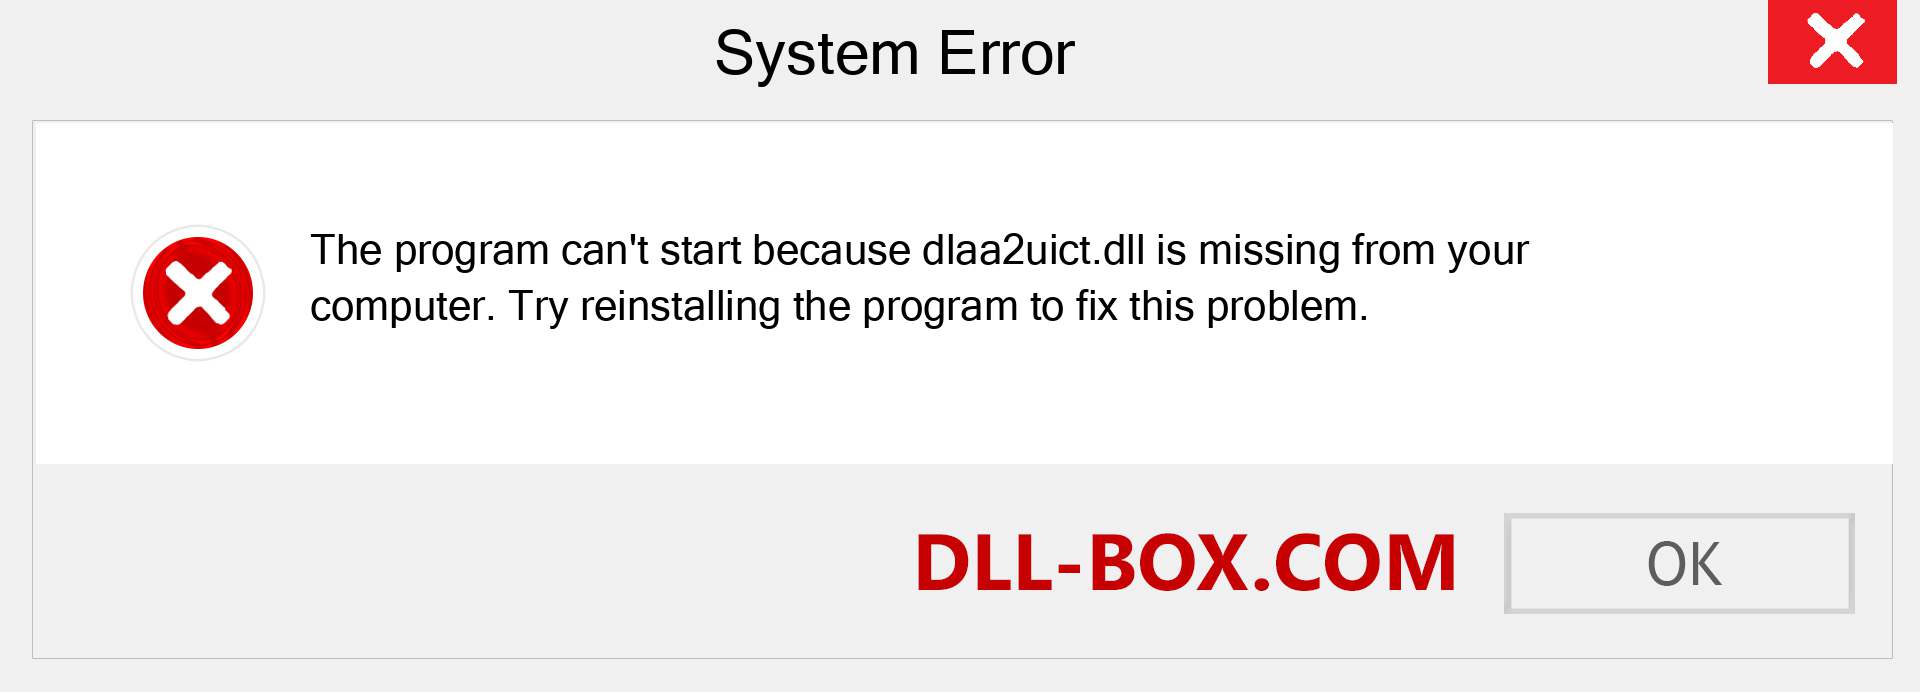  dlaa2uict.dll file is missing?. Download for Windows 7, 8, 10 - Fix  dlaa2uict dll Missing Error on Windows, photos, images